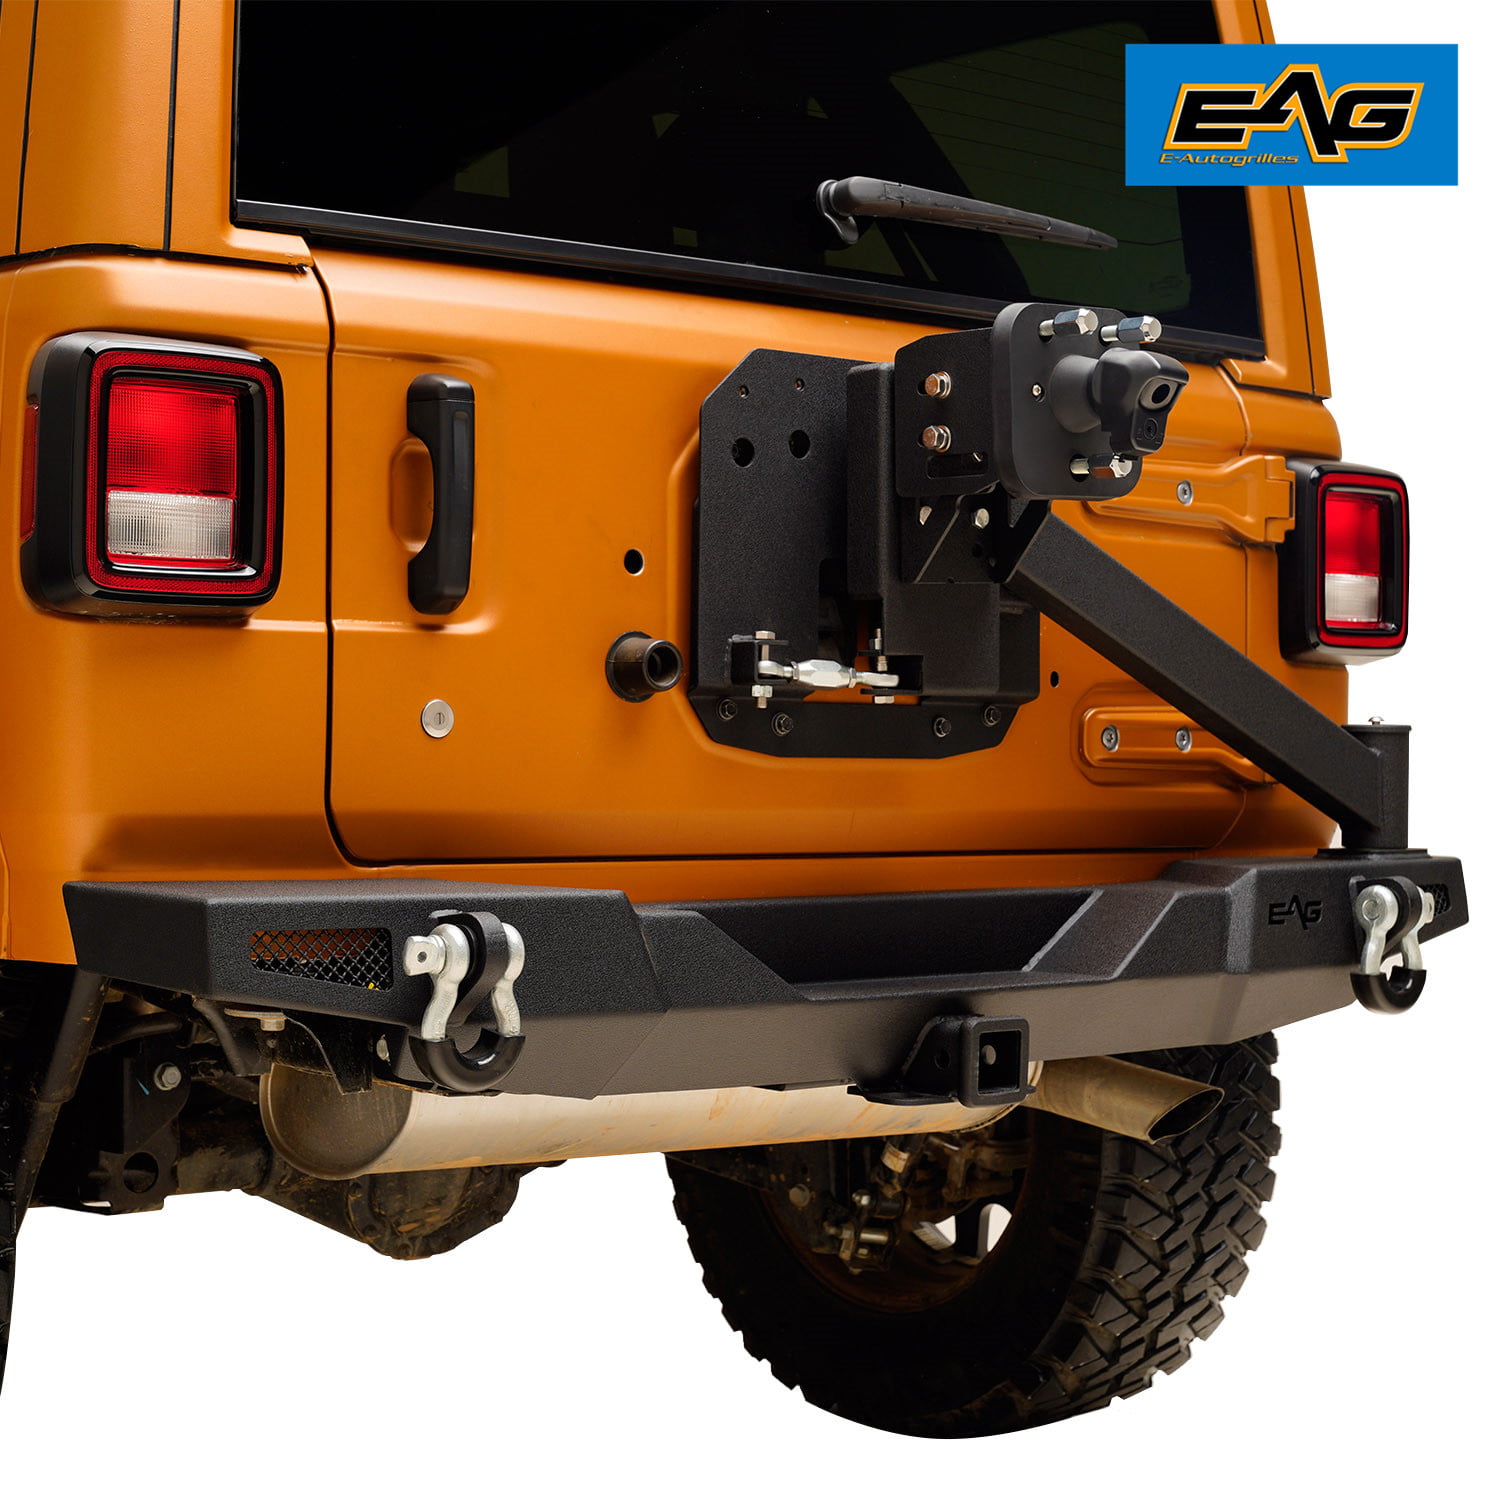 EAG Rear Bumper with Tire Carrier and Tire Adapter Fit for 18-19 Jeep Wrangler JL 